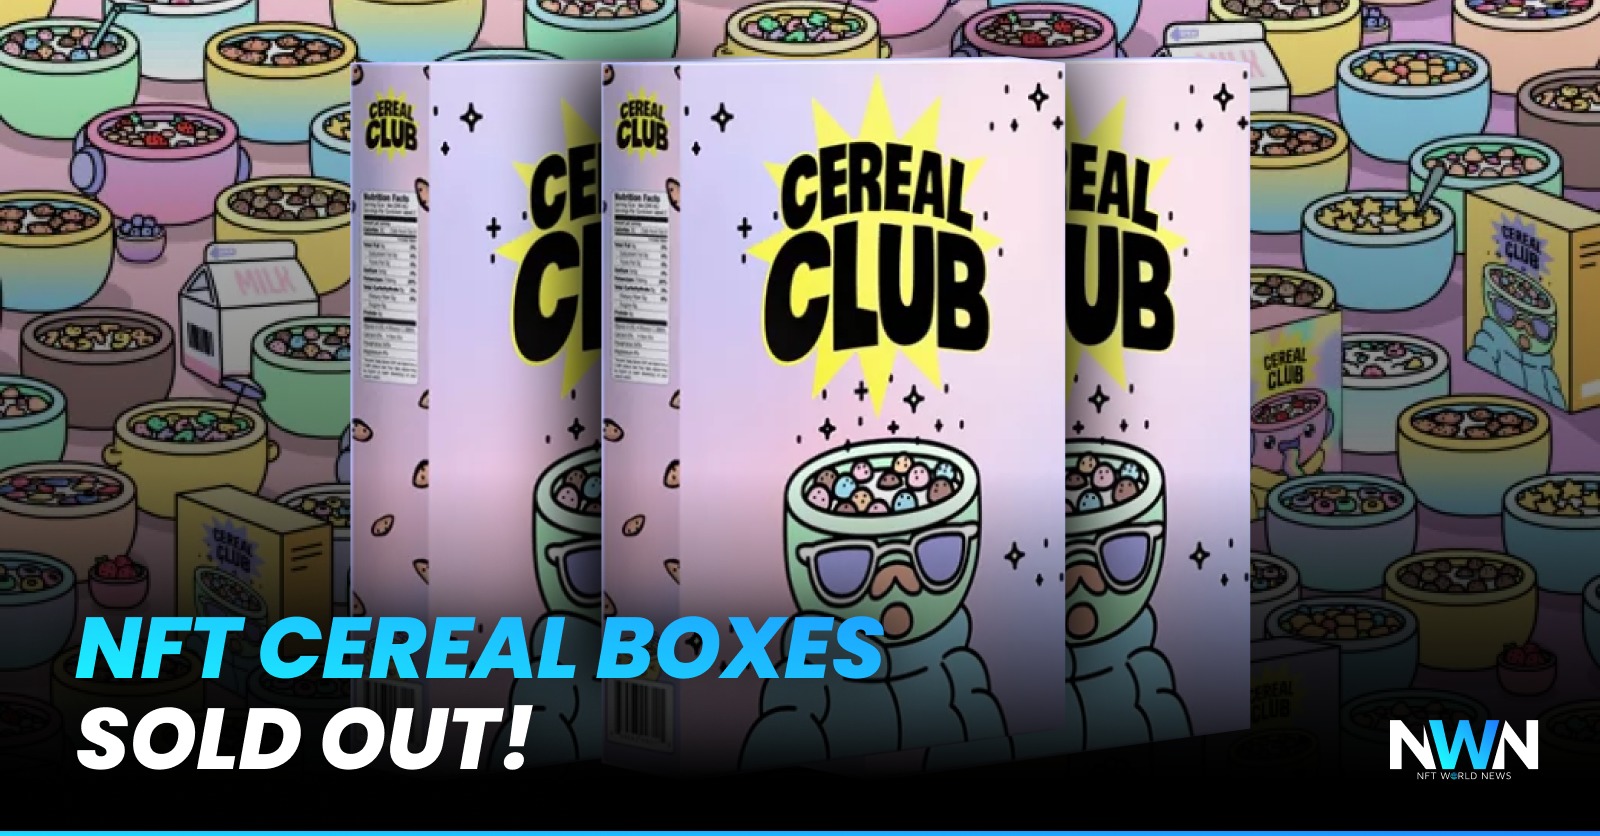 NFT Cereal Boxes Sold Out!